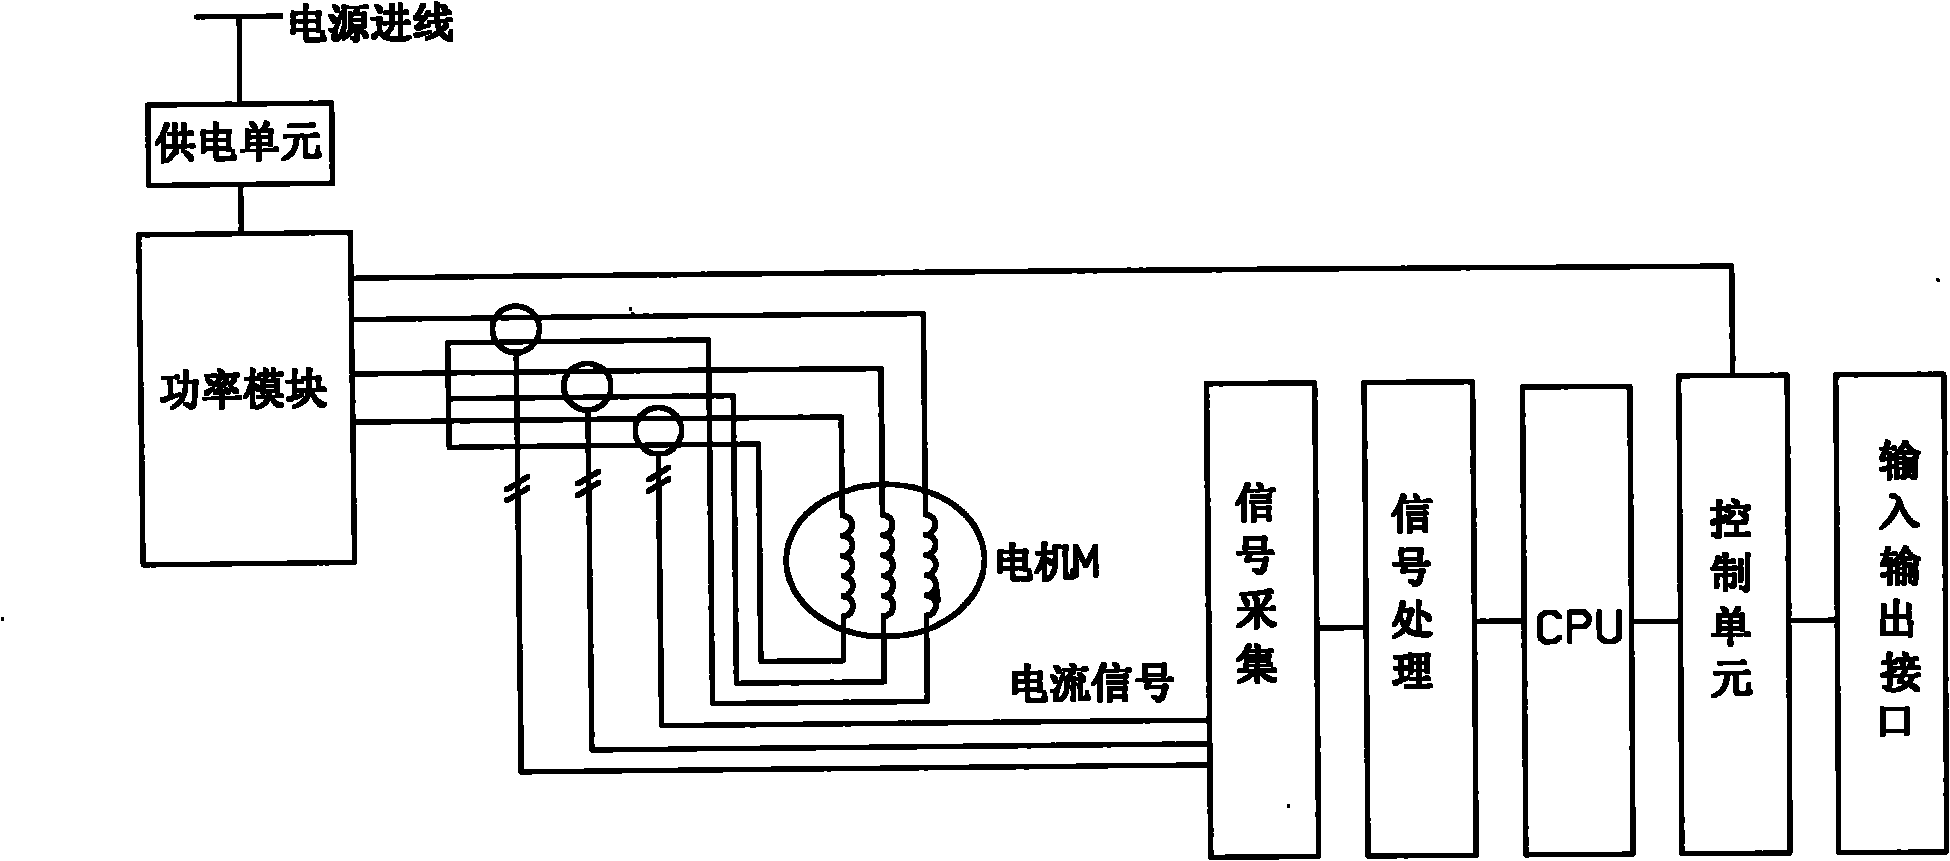 High voltage converter with differential protection